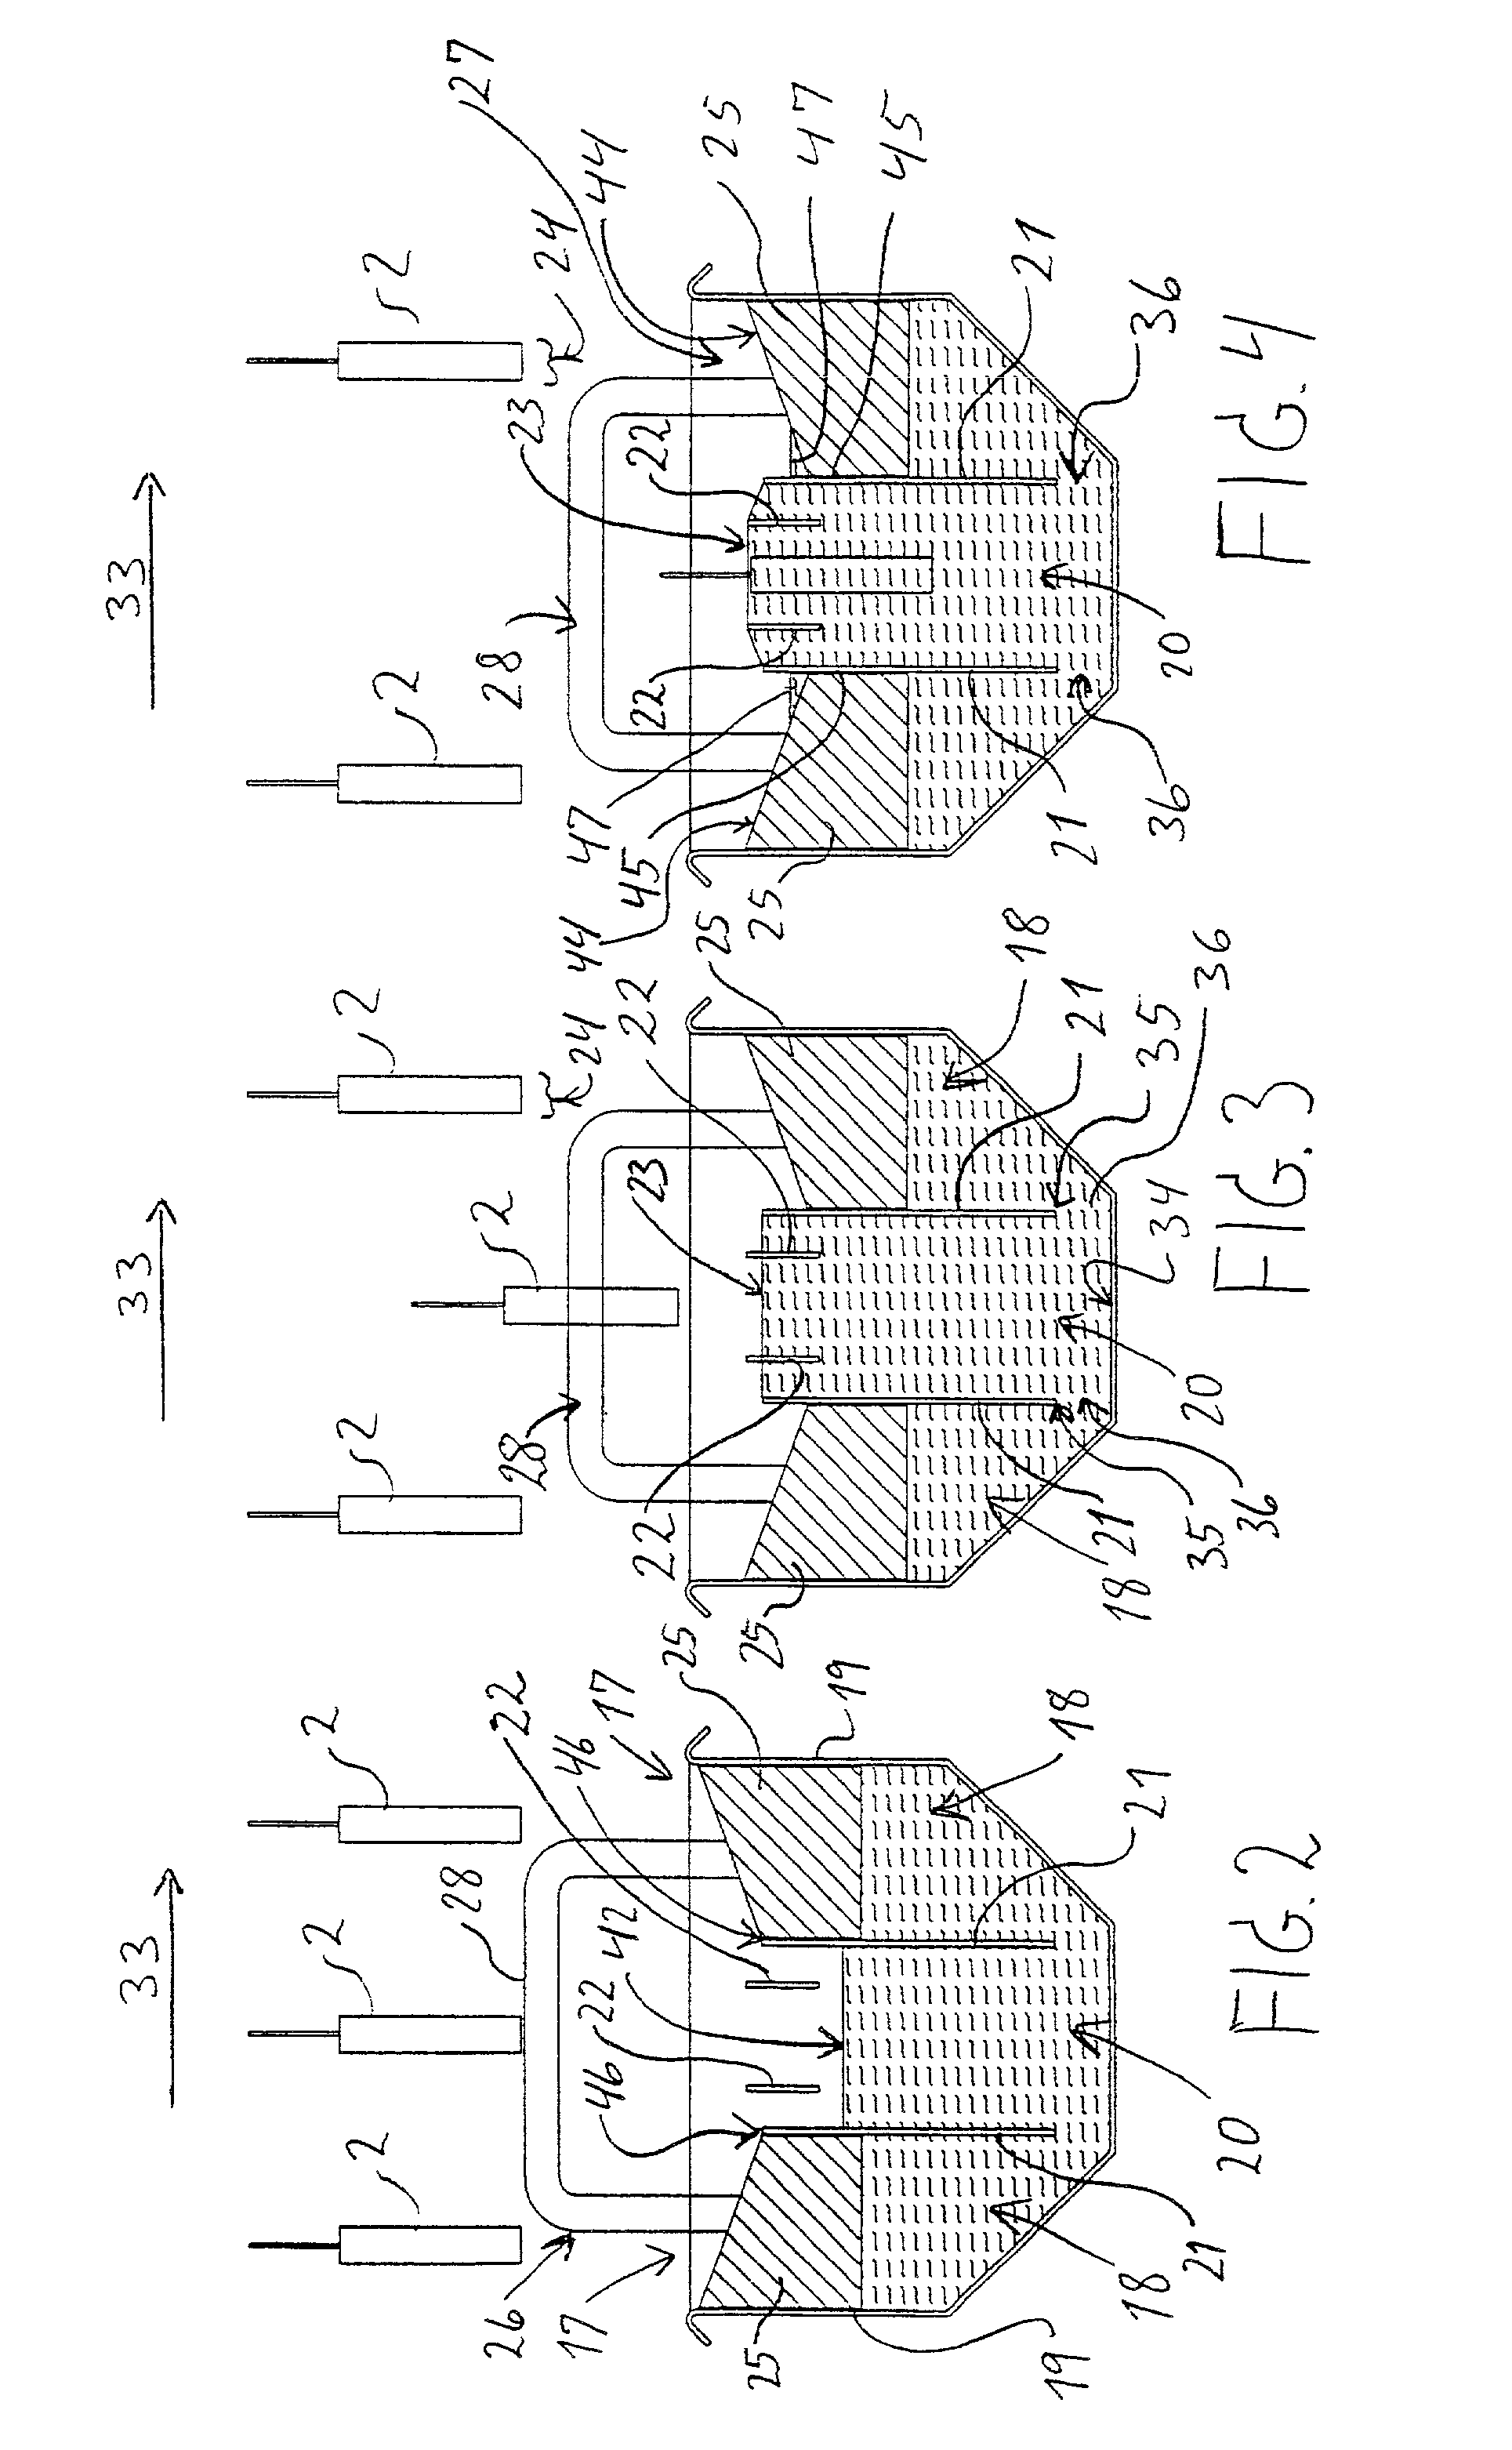 Method and apparatus for coating a product